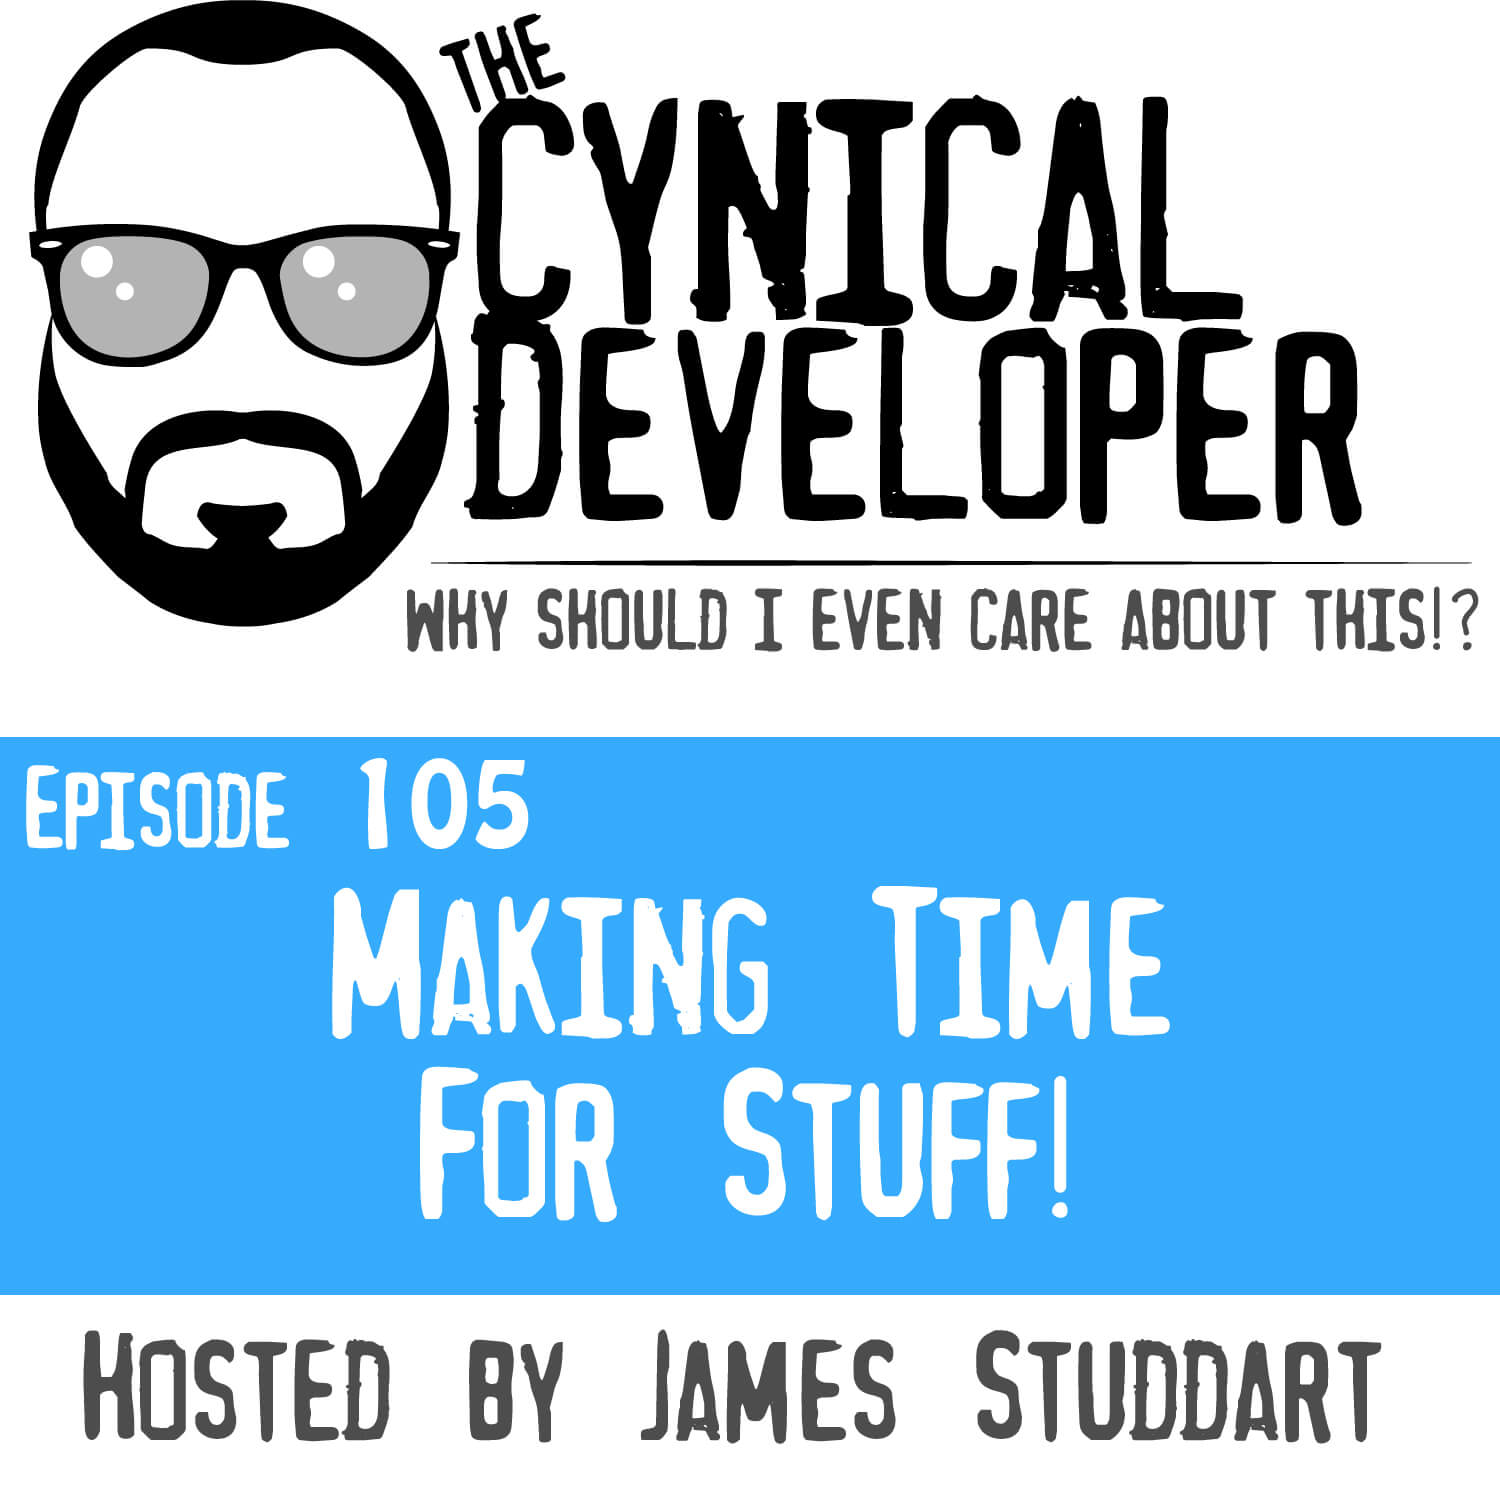 Episode 105 - Making Time for Stuff!